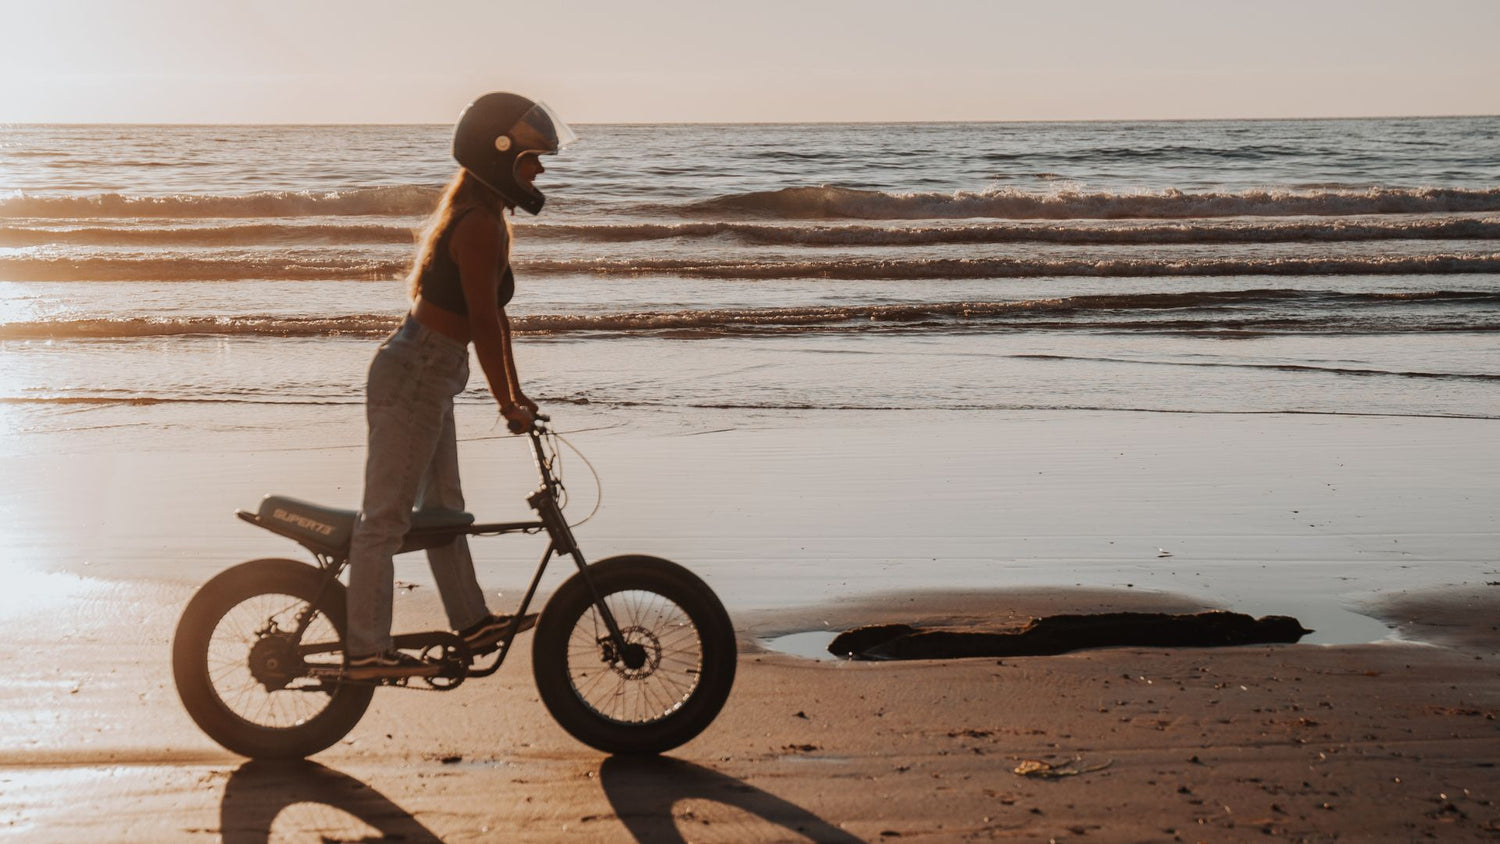 Young woman riding a Super73 ebike with a helmet on across the beach